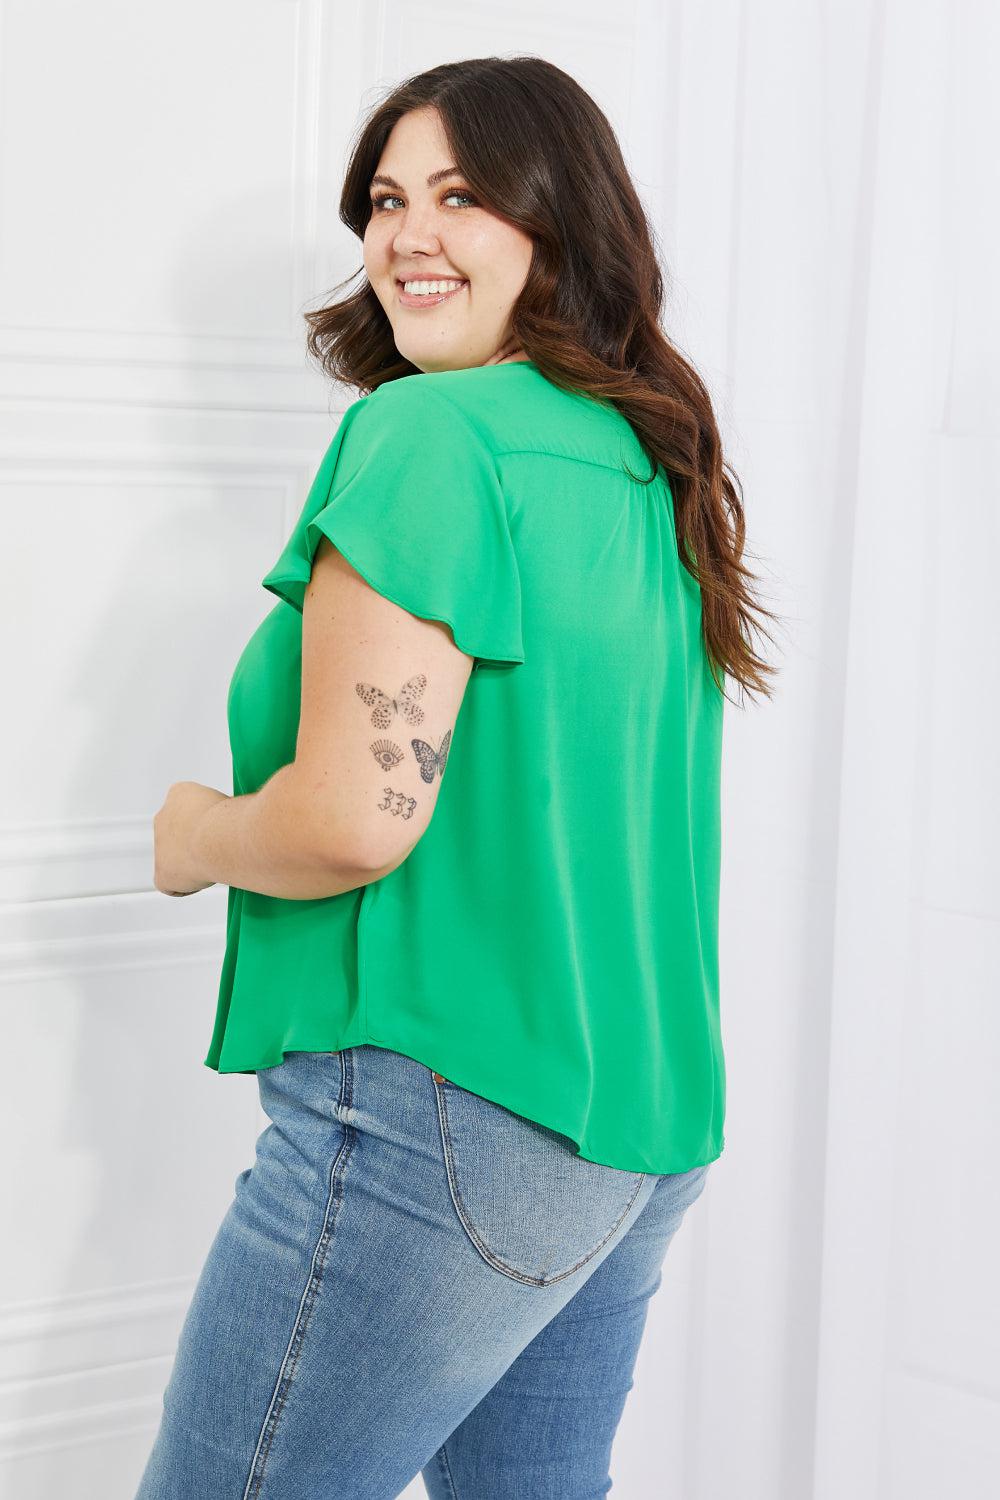 Sew In Love Just For You Full Size Short Ruffled sleeve length Top in Green BLUE ZONE PLANET